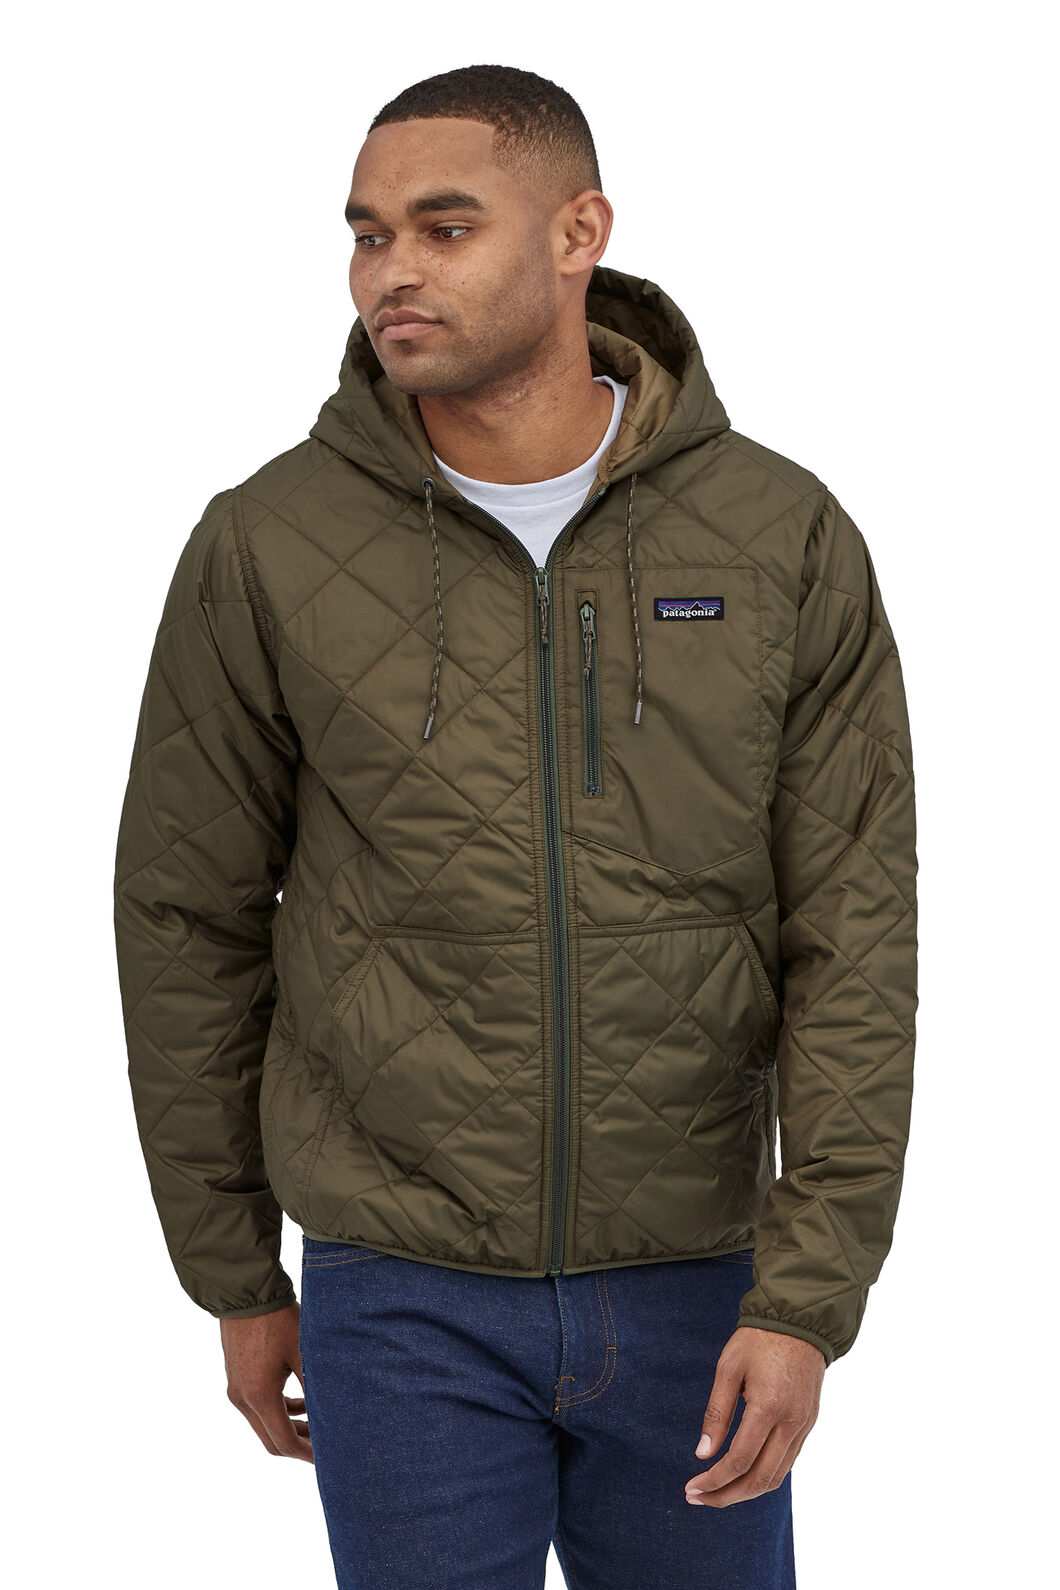 Patagonia Men's Diamond Quilted Bomber Hooded Jacket | Macpac